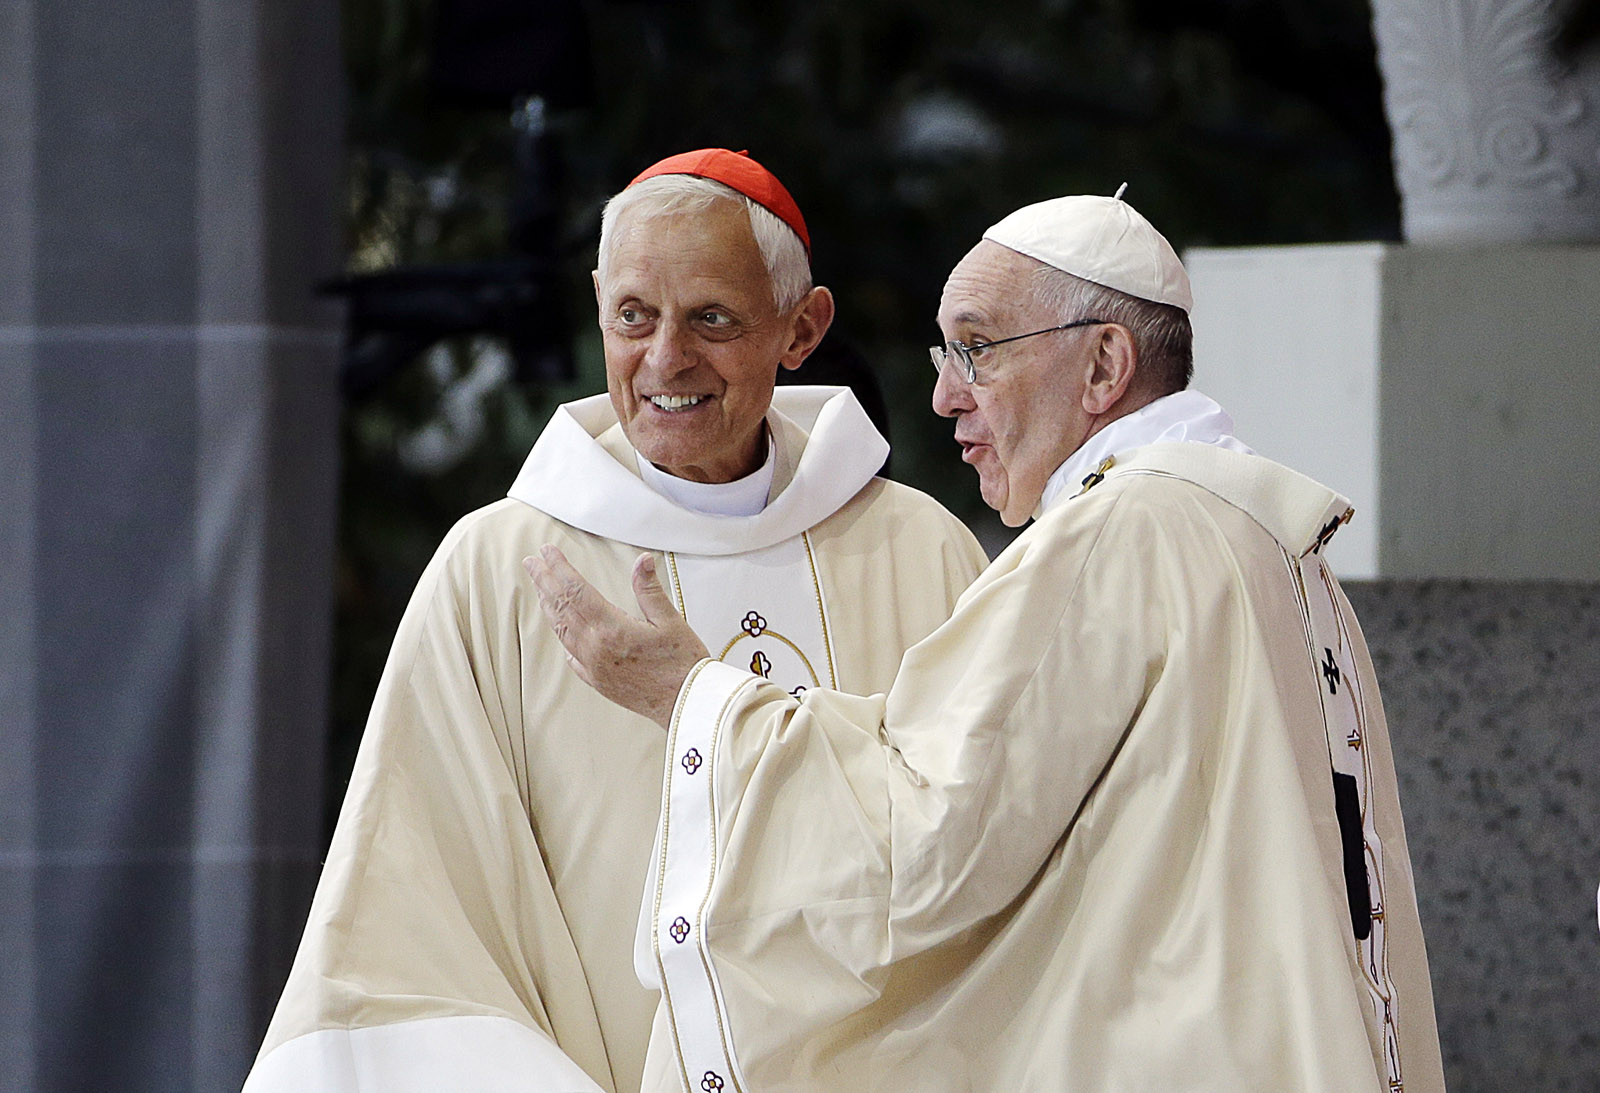 D.C. archbishop Wuerl recalls his moments with ‘real and authentic’ pope